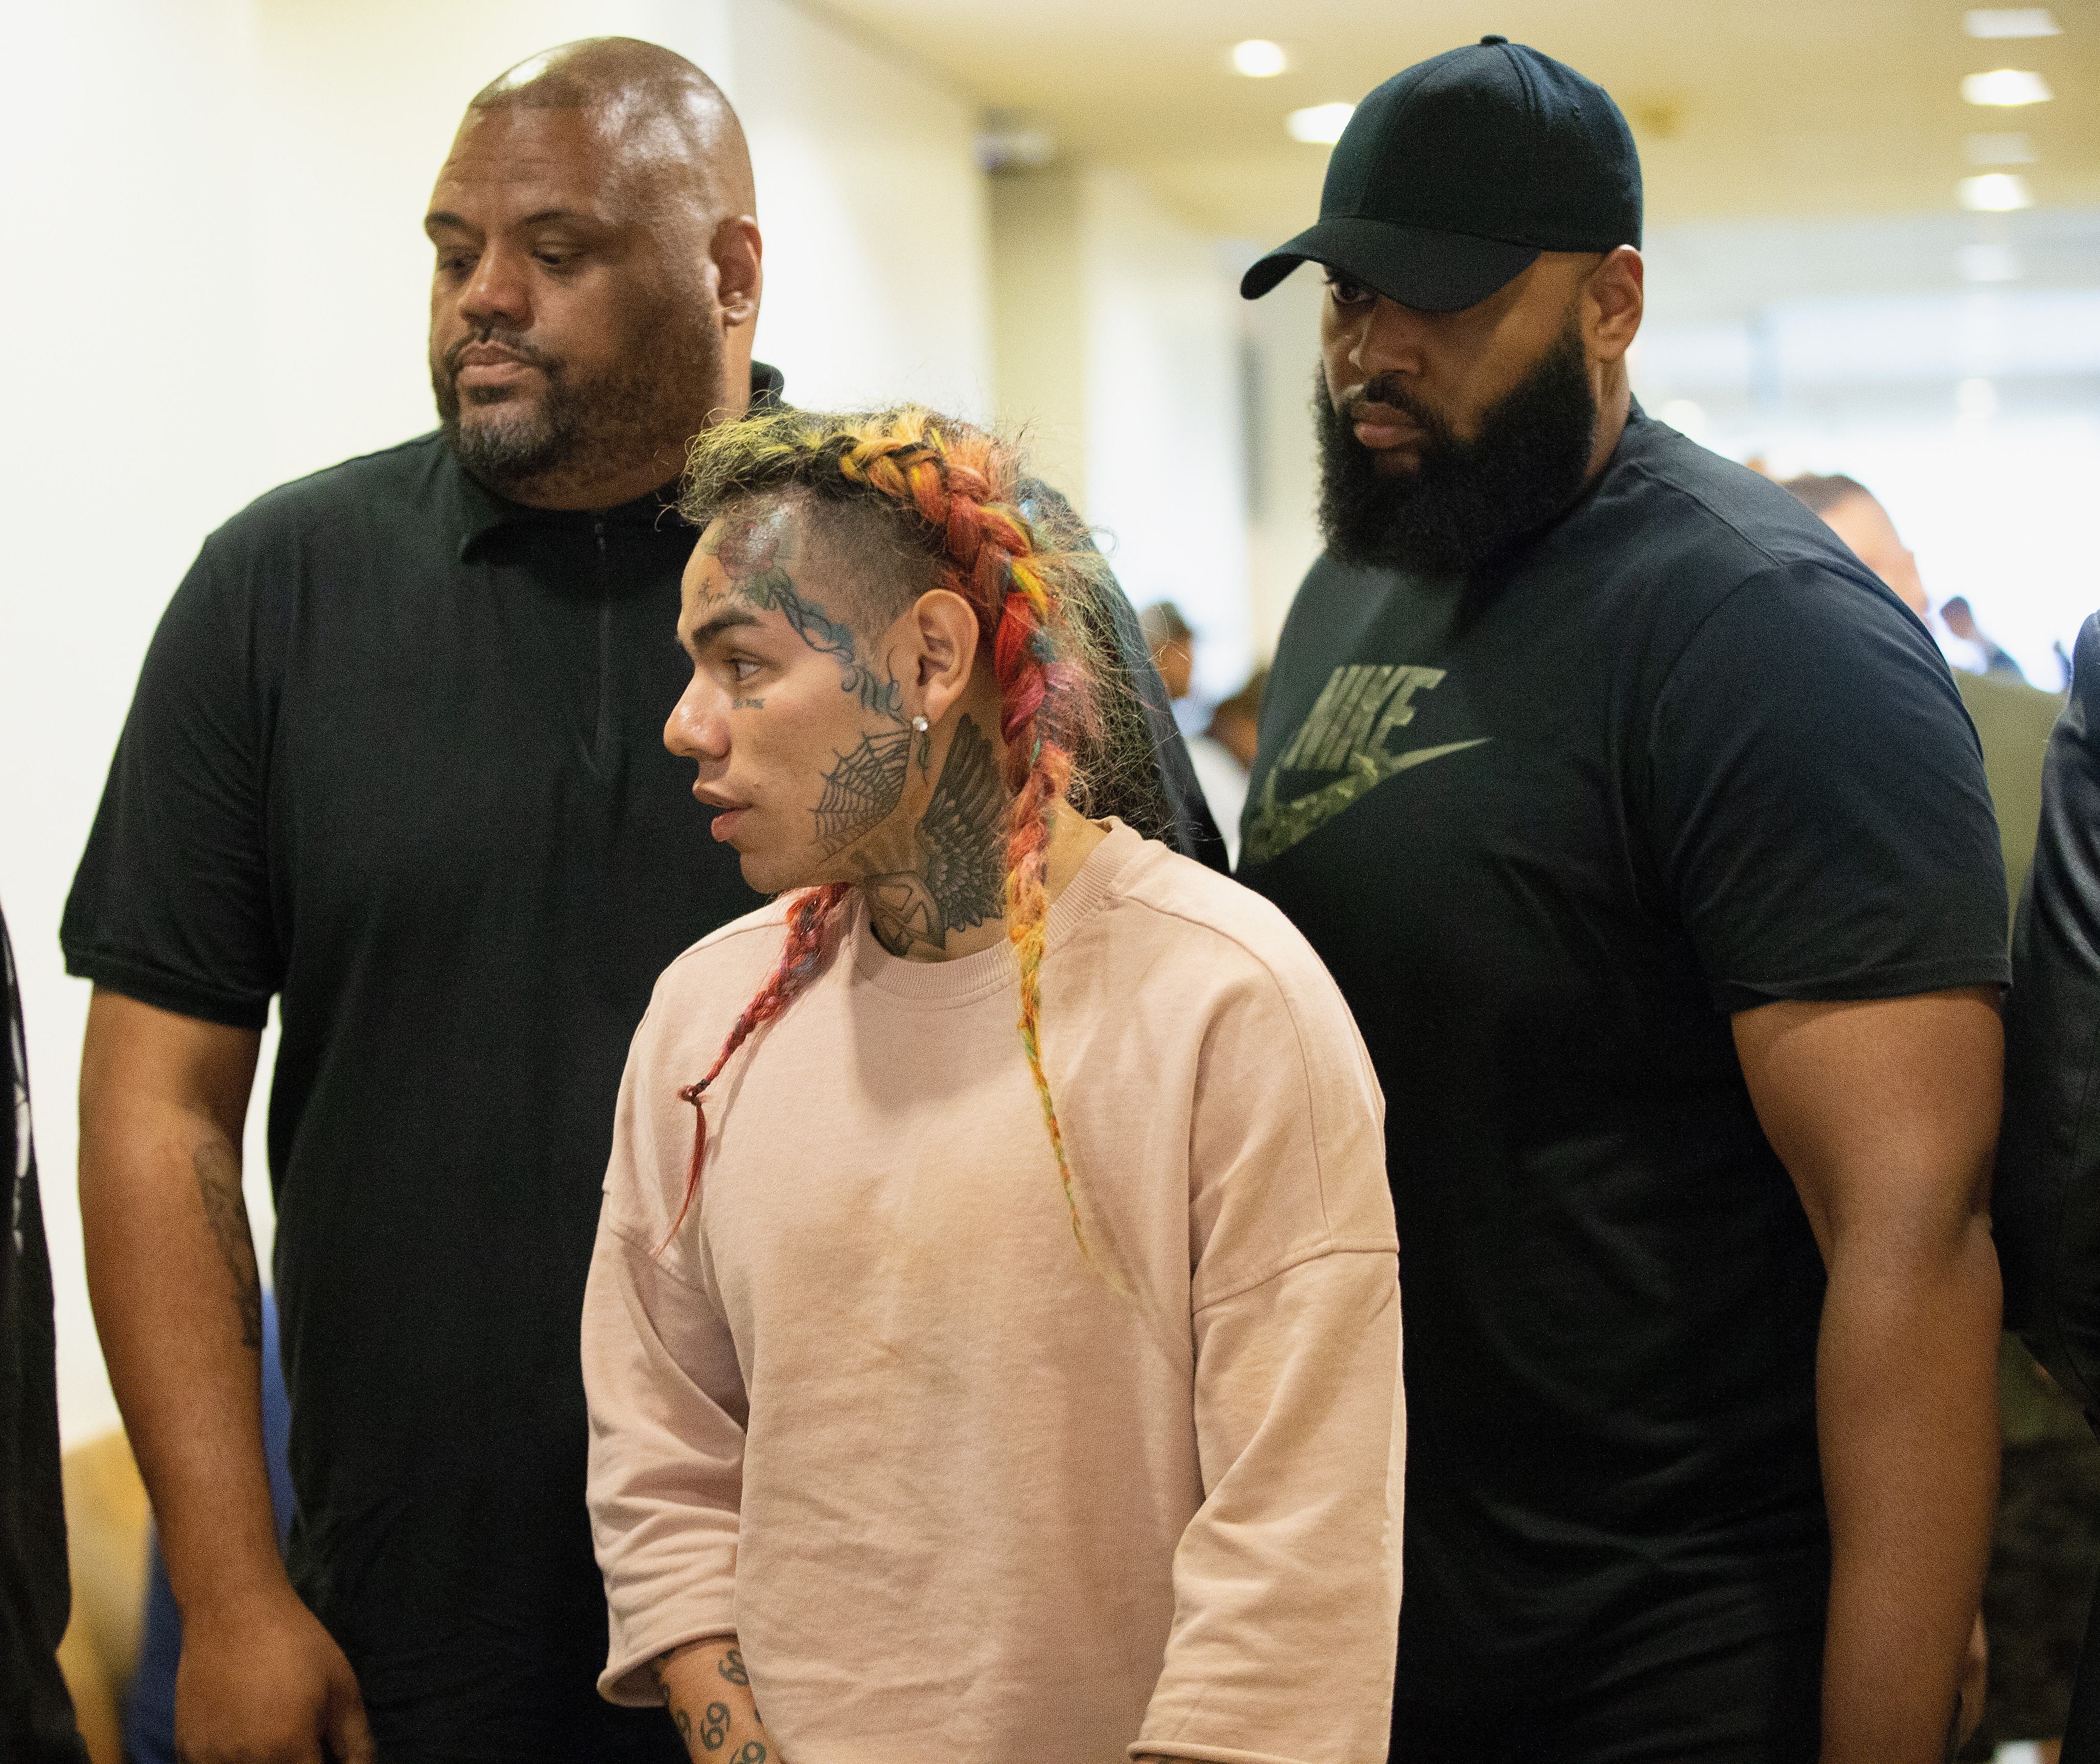 Rapper Tekashi69, real name Daniel Hernandez and also known as 6ix9ine, Tekashi 6ix9ine, Tekashi 69, arrives for his arraignment on assault charges in County Criminal Court #1 at the Harris County Courthouse on August 22, 2018 in Houston, Texas. (Photo by Bob Levey/Getty Images)